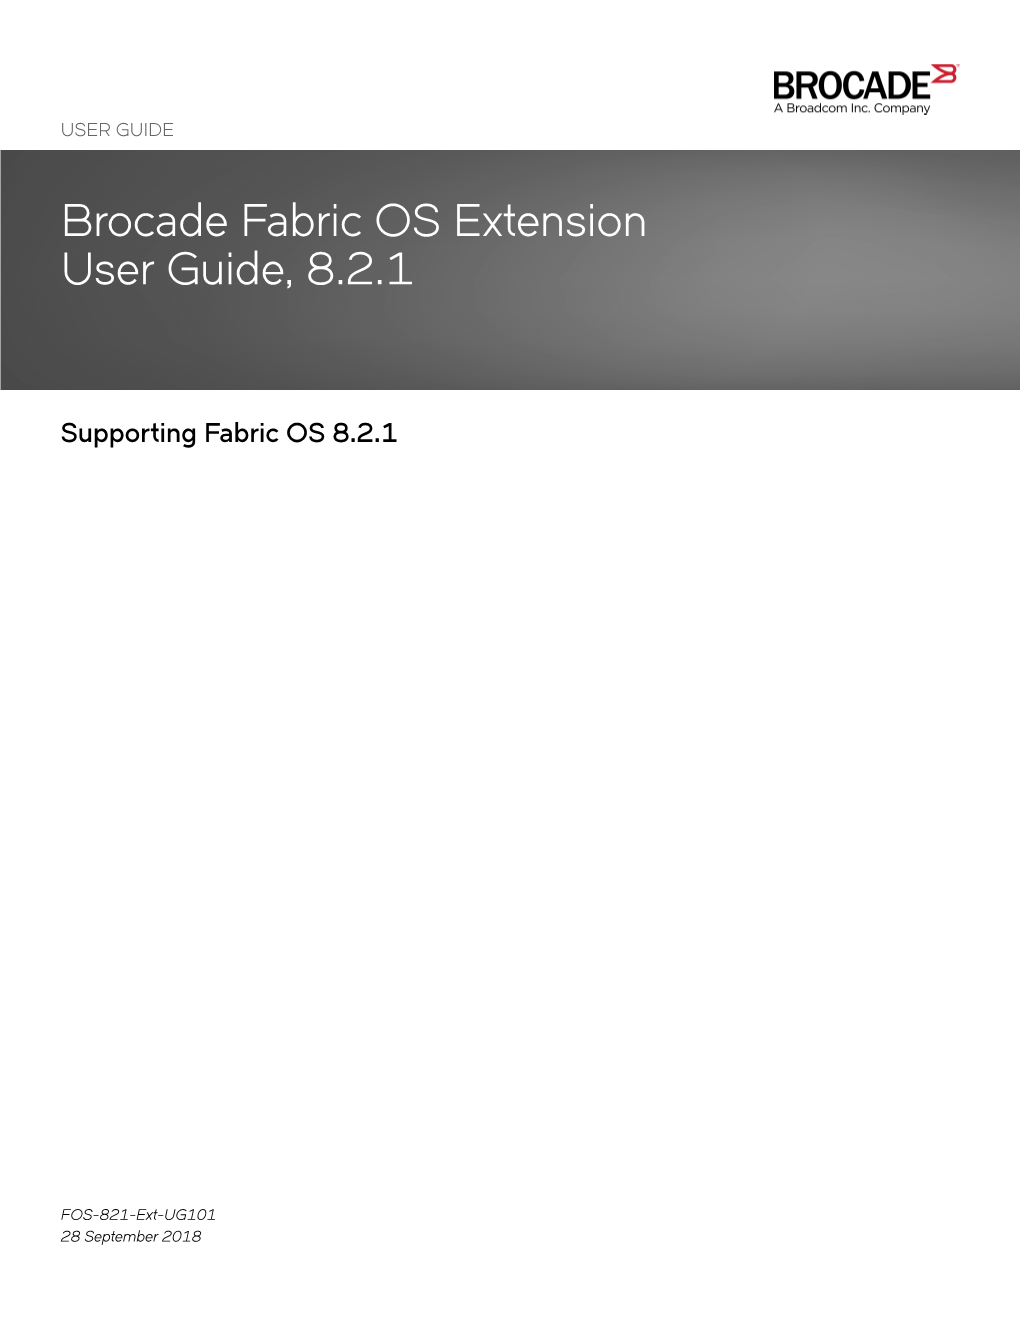 Brocade Fabric OS Extension User Guide, 8.2.1